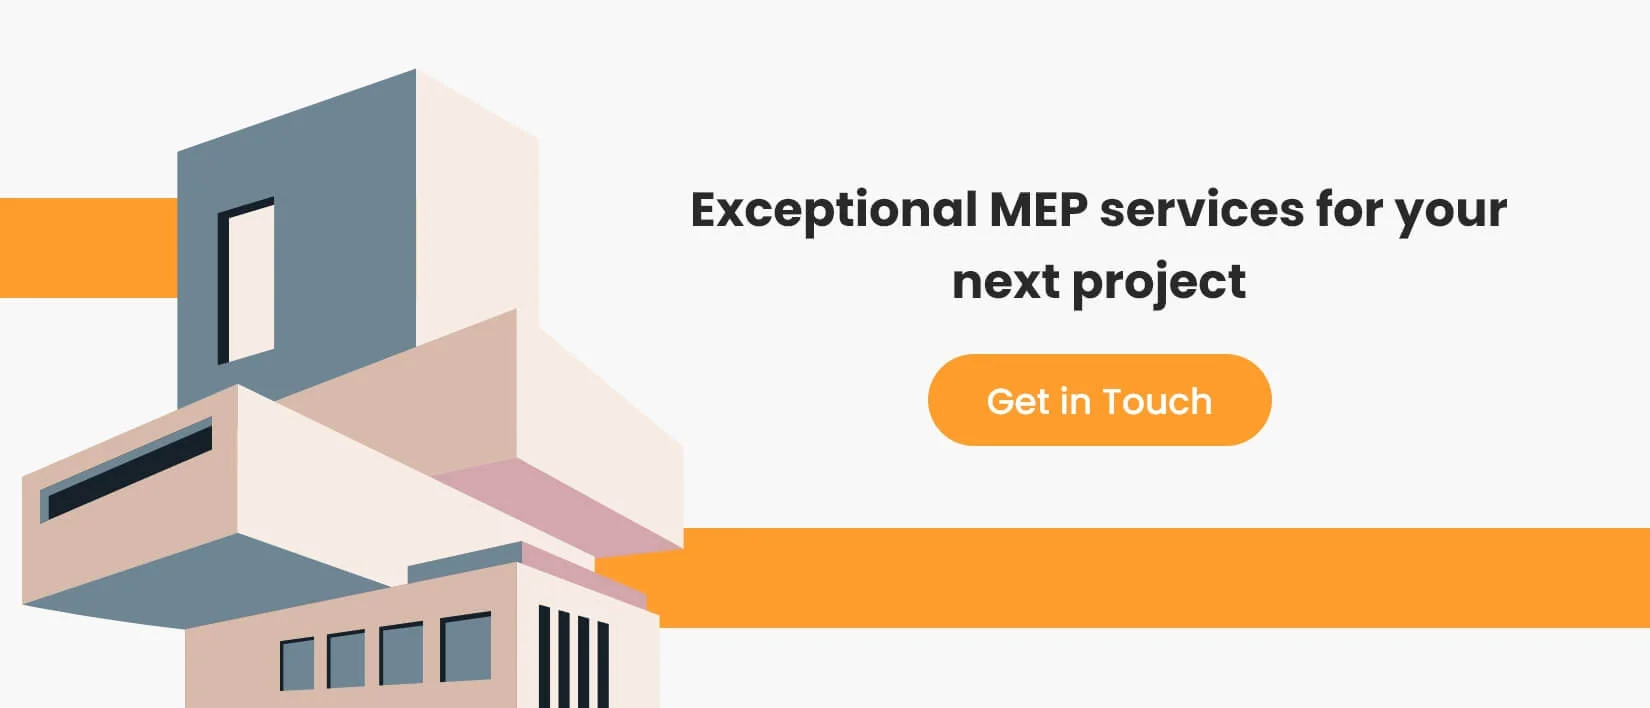 Exceptional MEP services for your next project